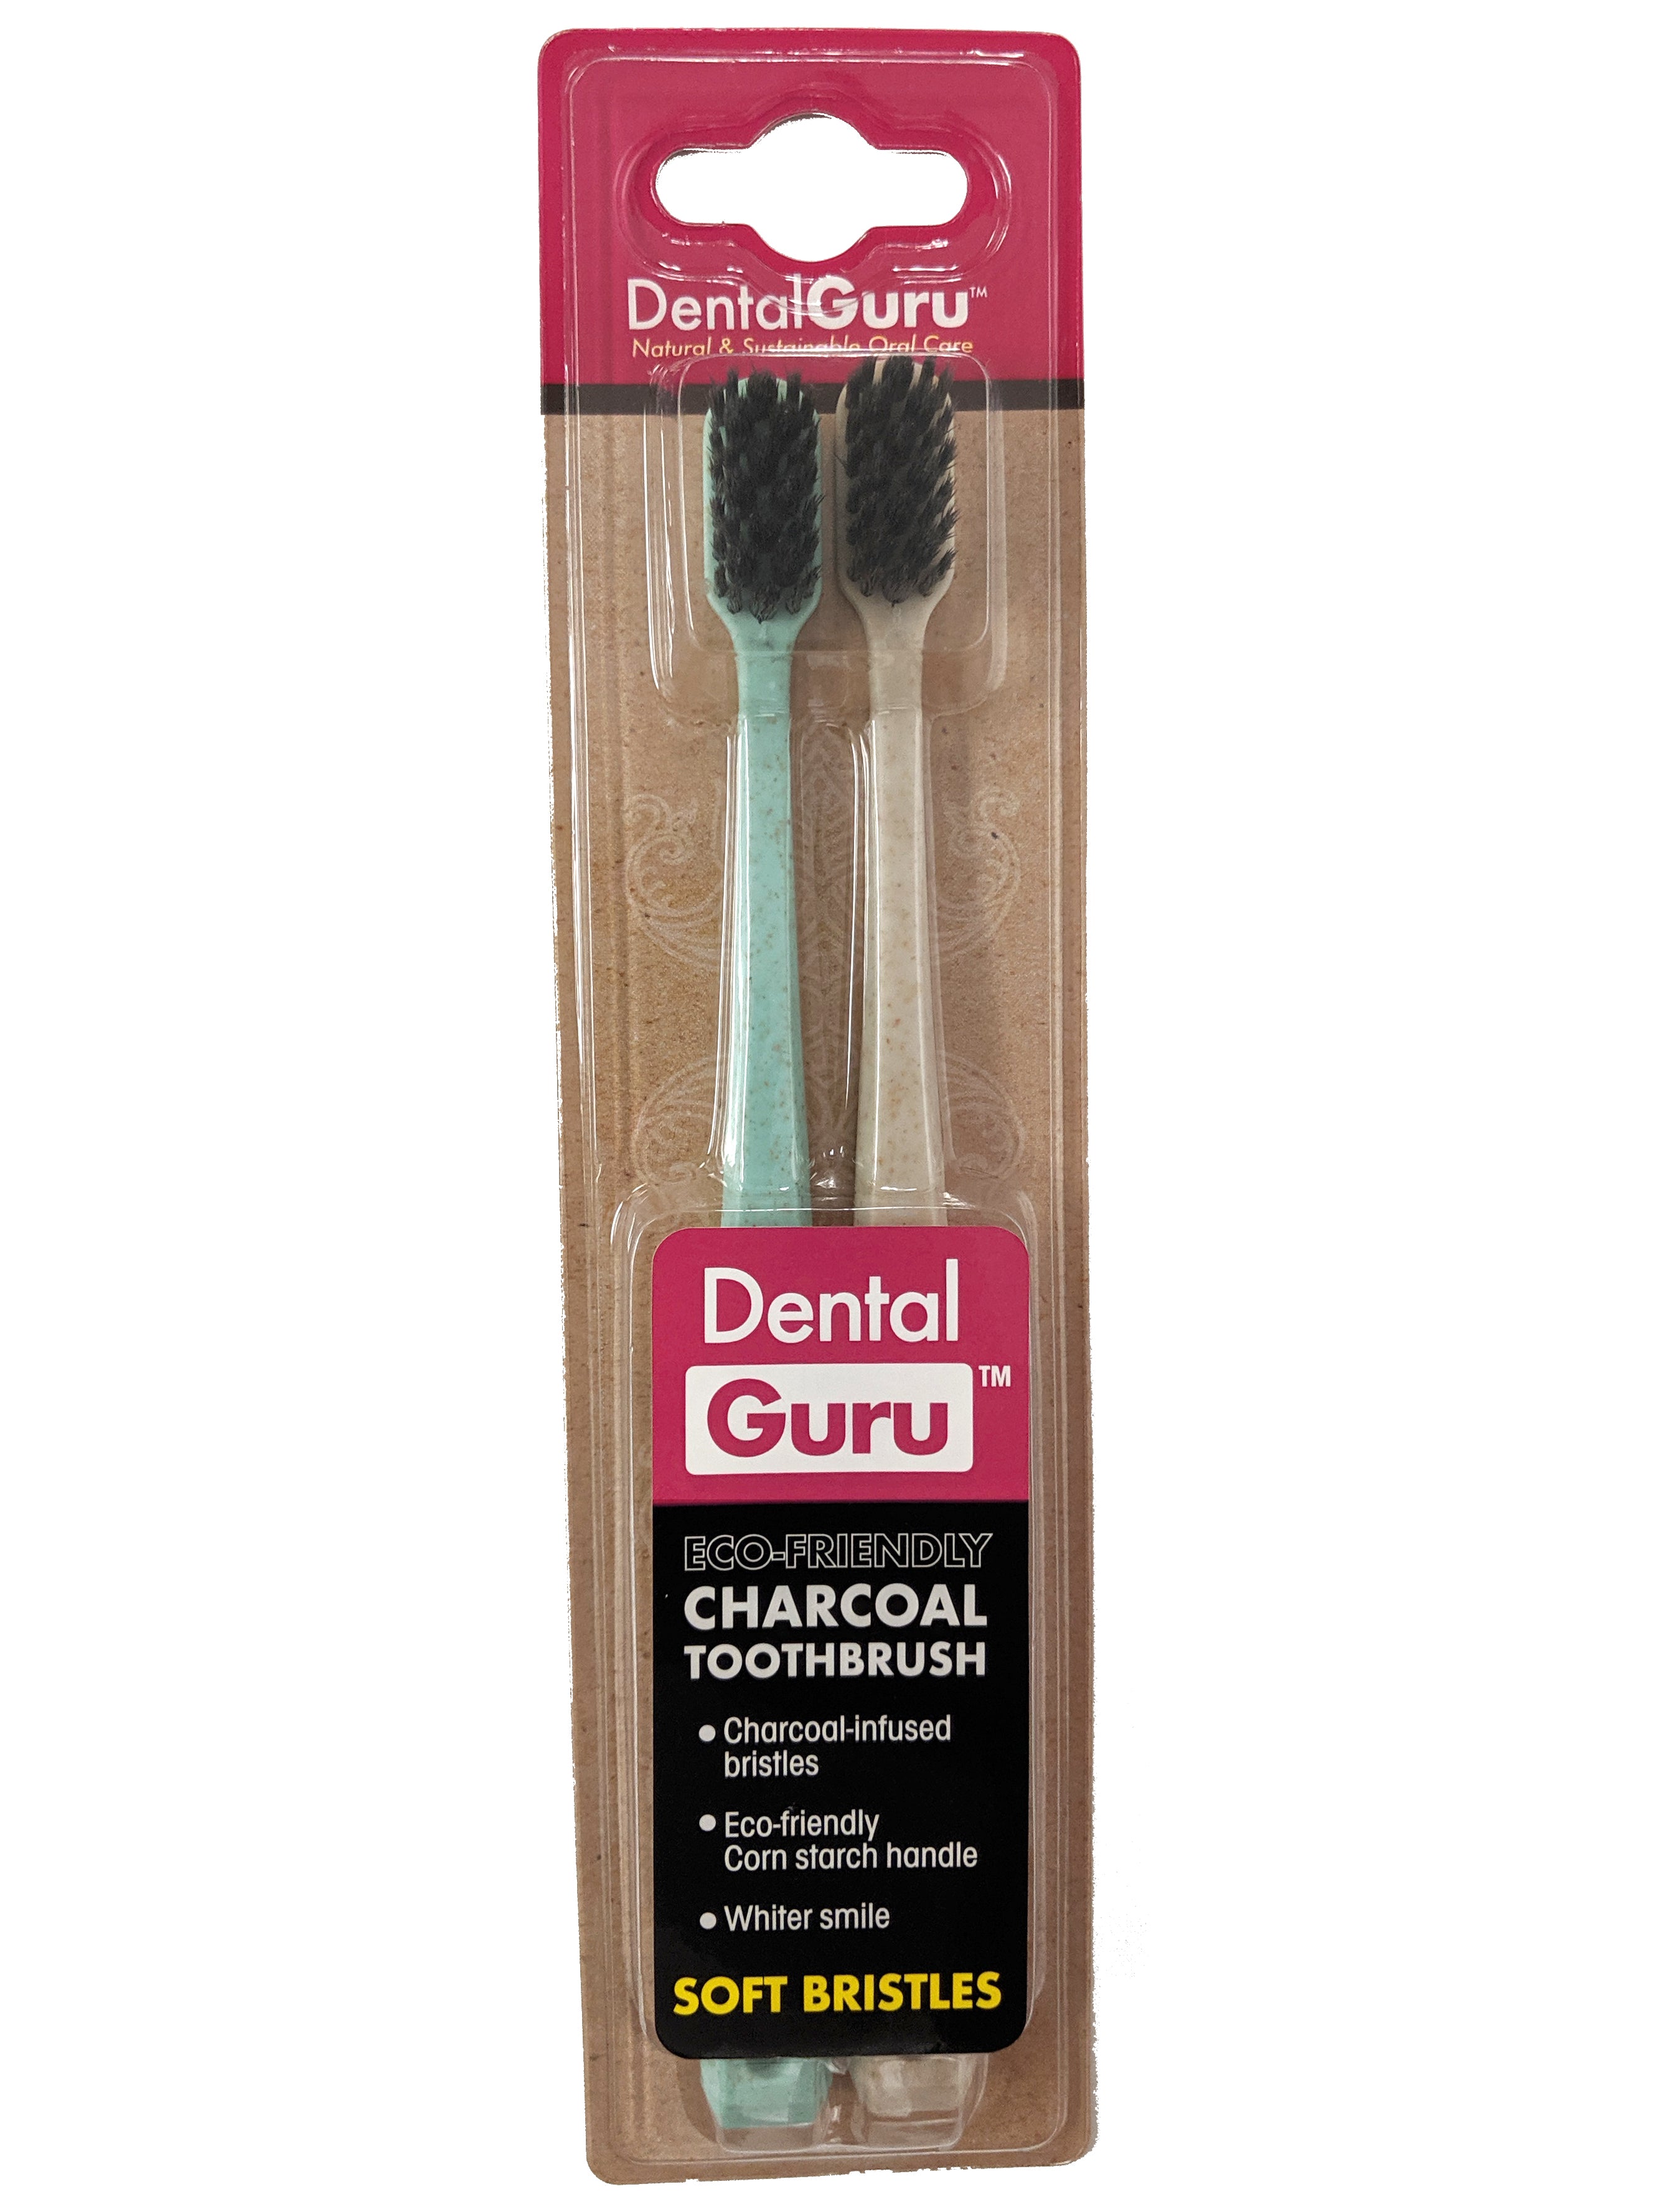 DentalGuru Soft Bristles (pack of 18)- Wholesale Only, Contact to Purchase